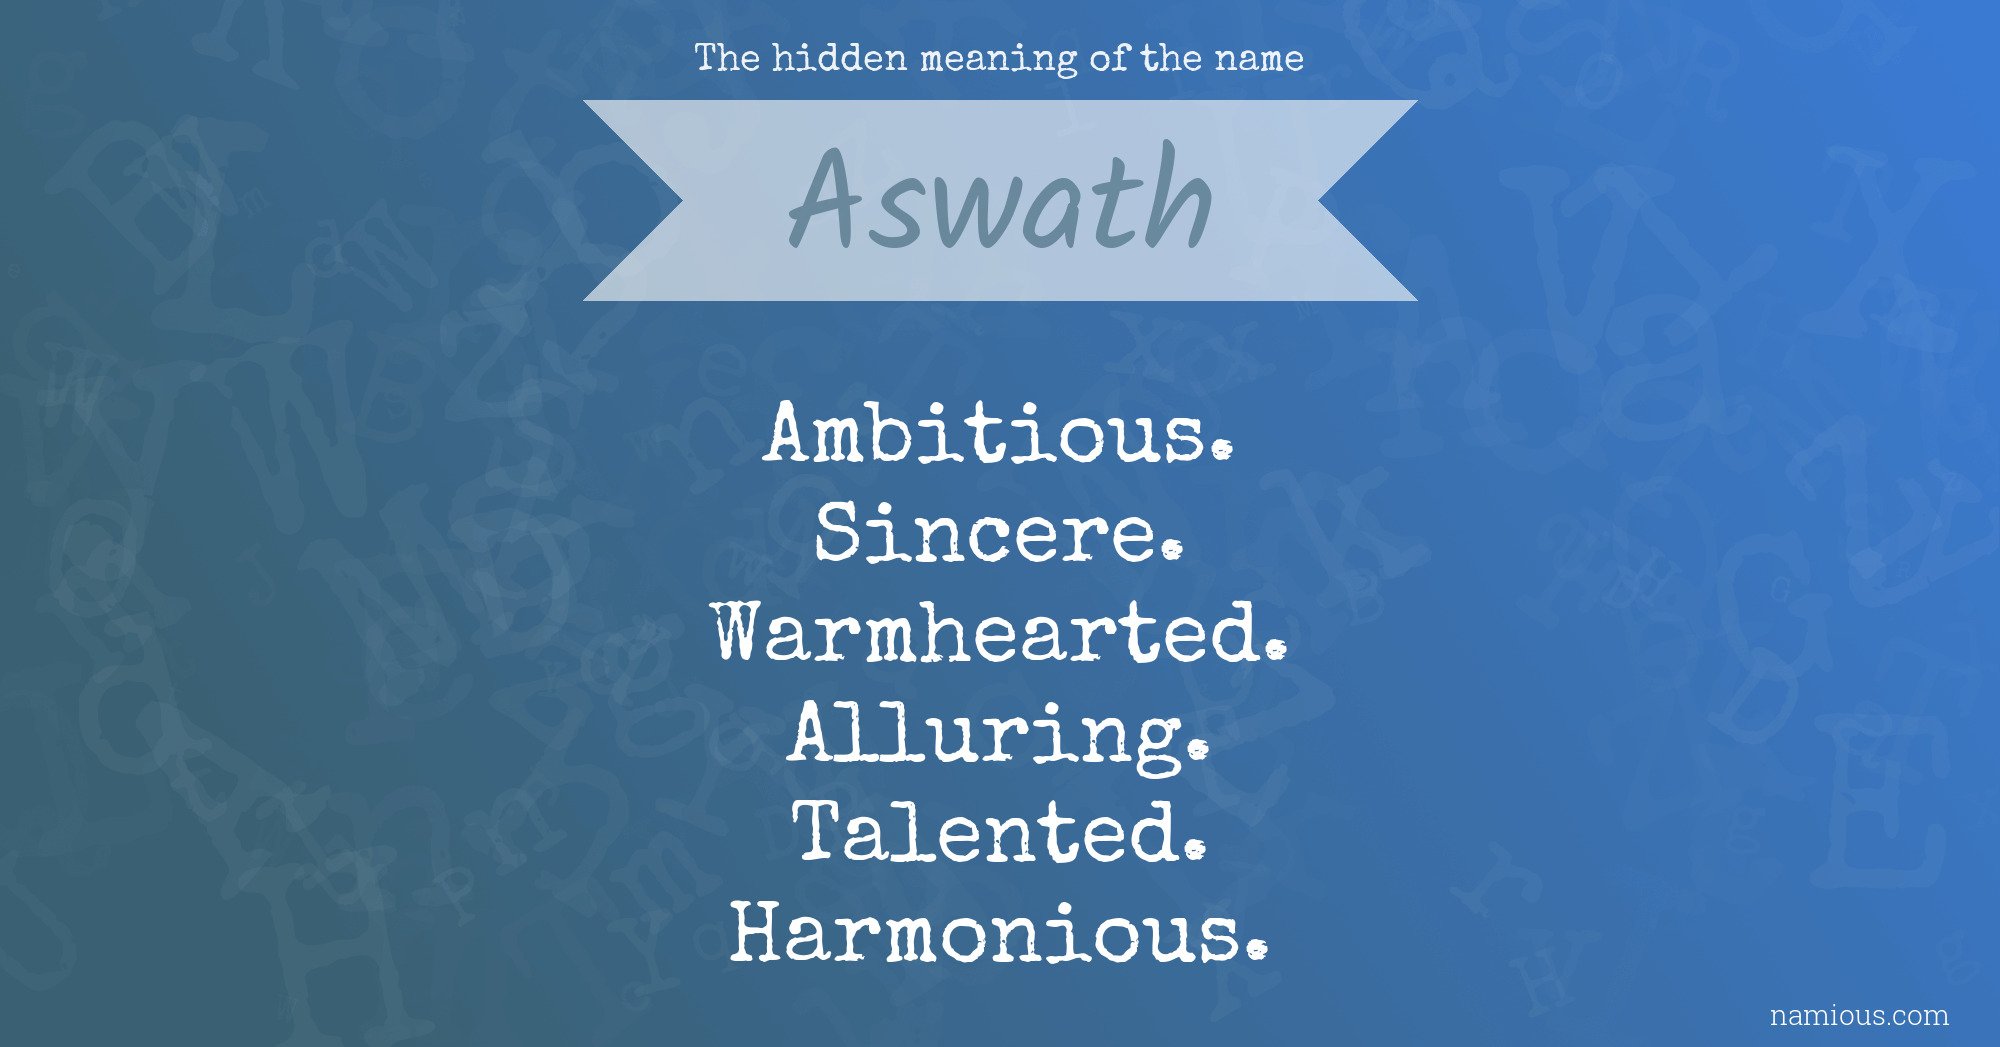 The hidden meaning of the name Aswath